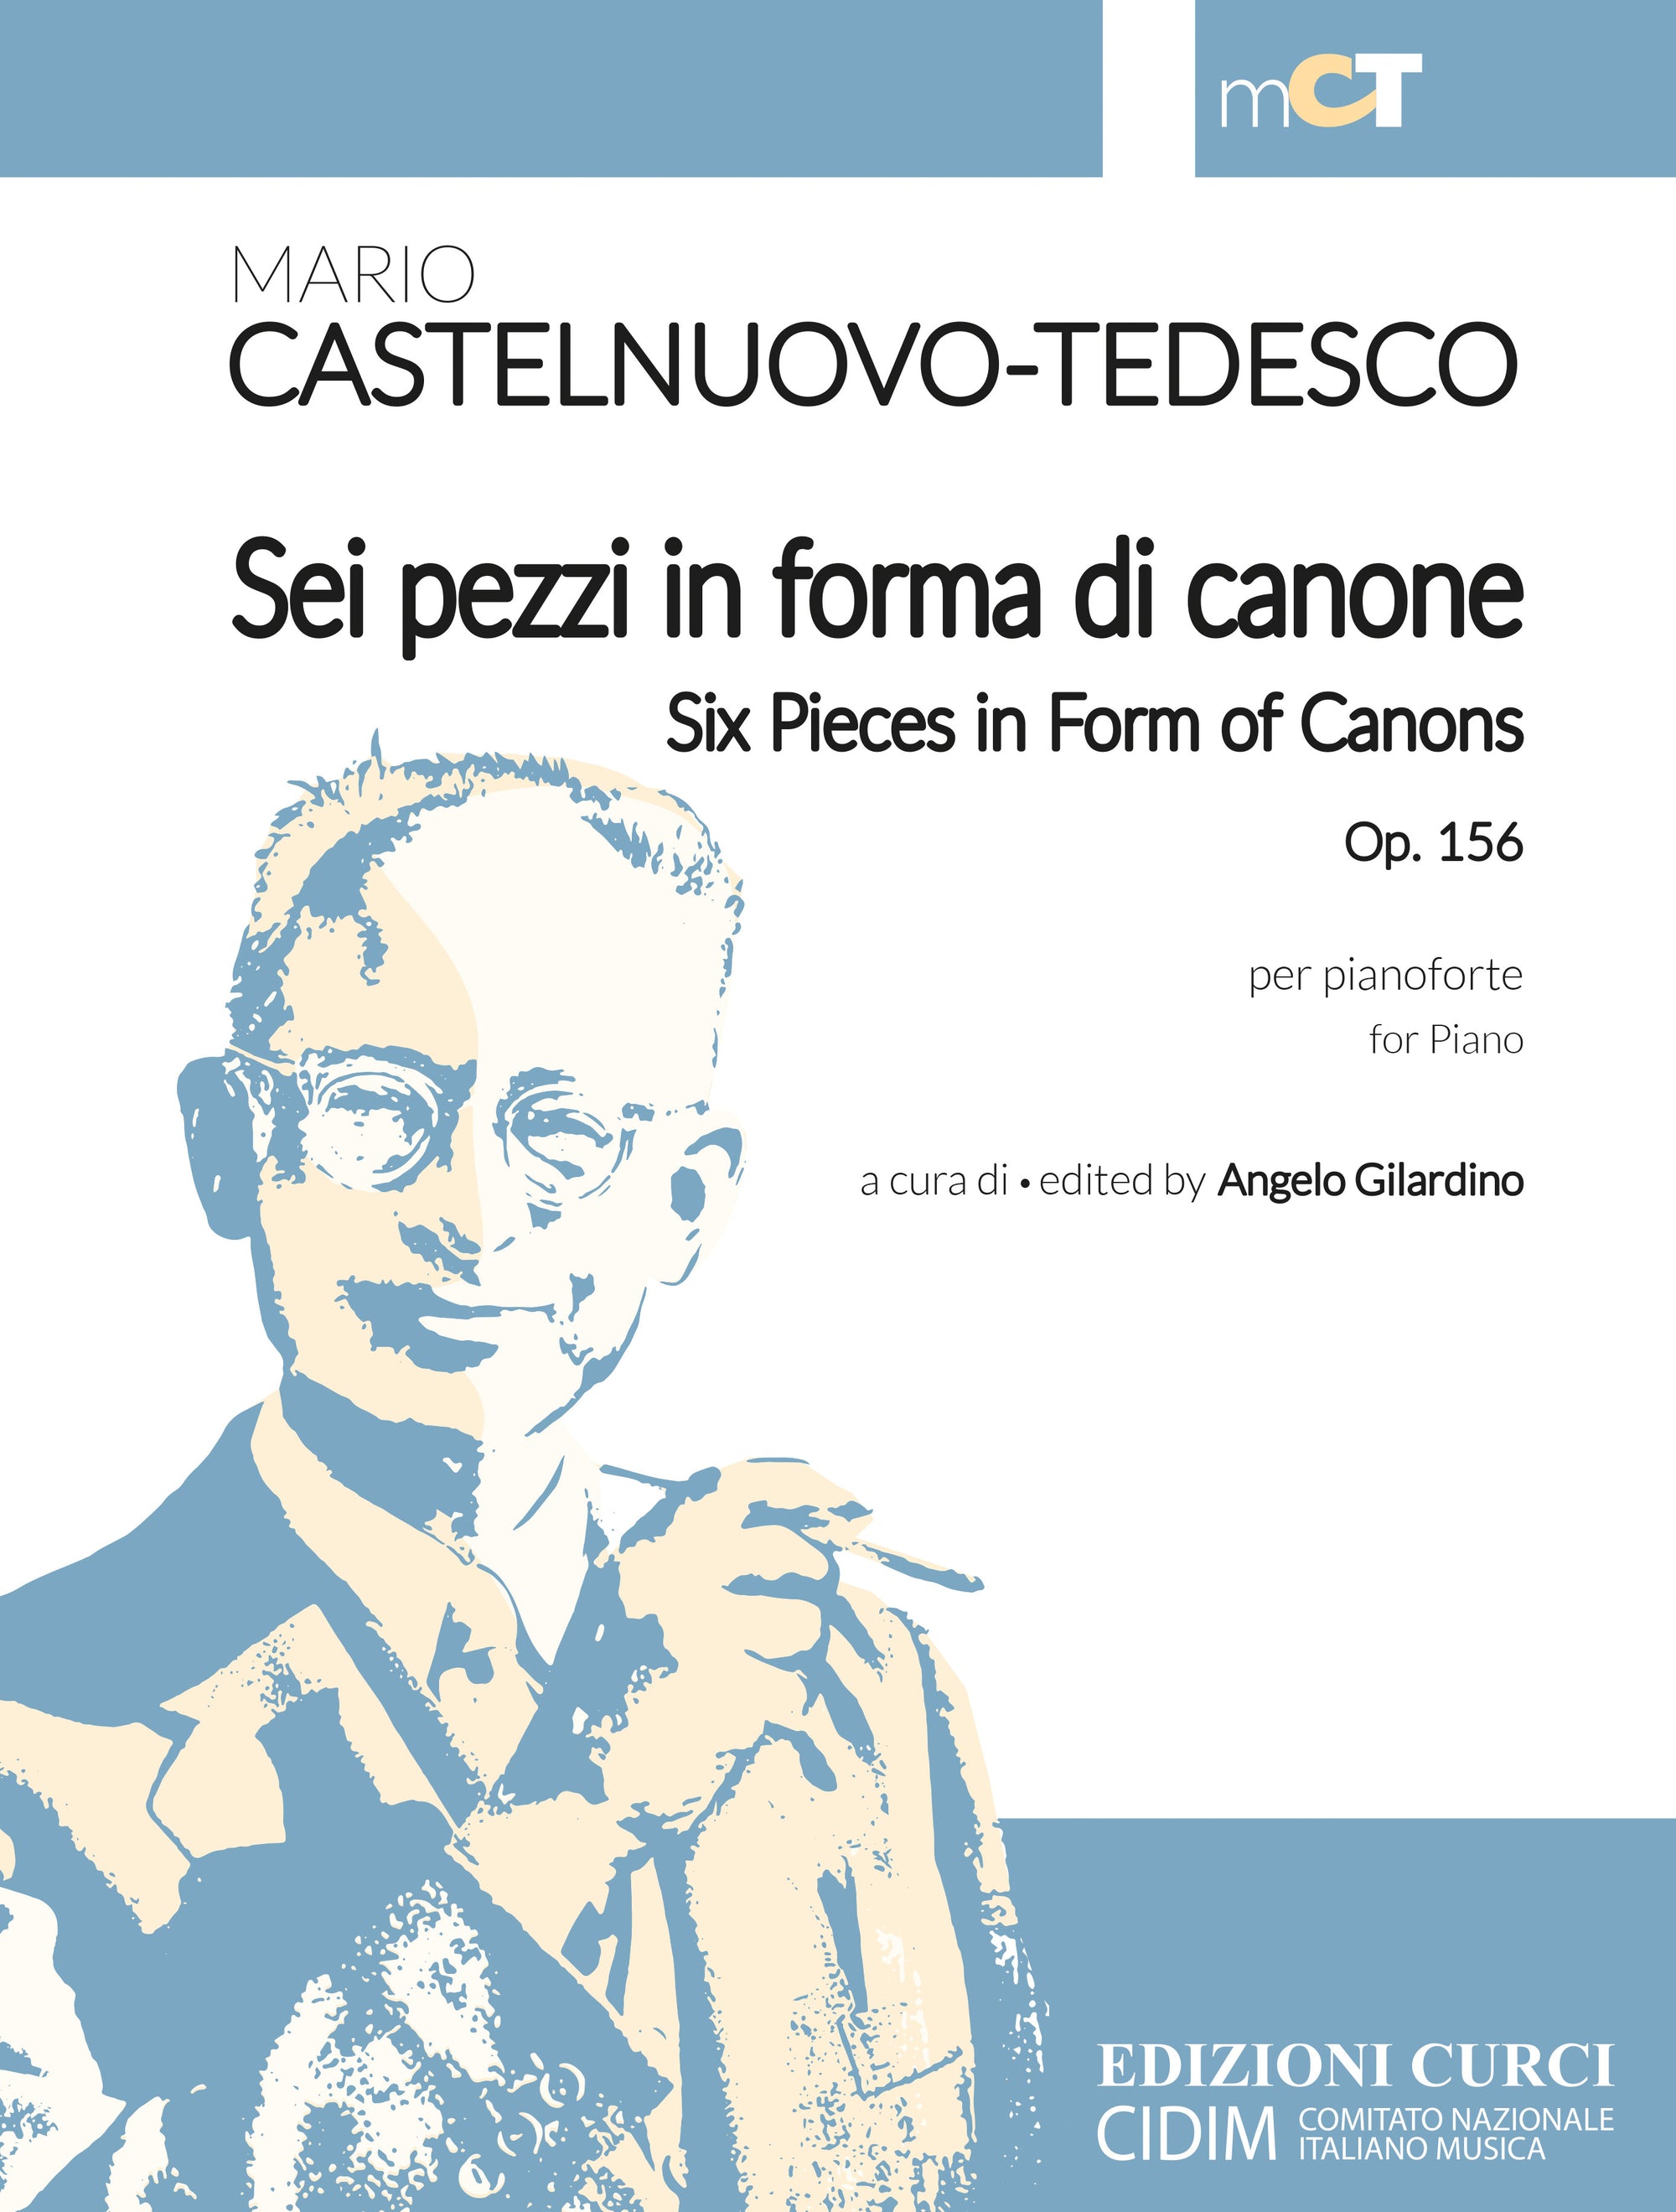 Castelnuovo-Tedesco: Six Pieces in Form of Canons, Op. 156